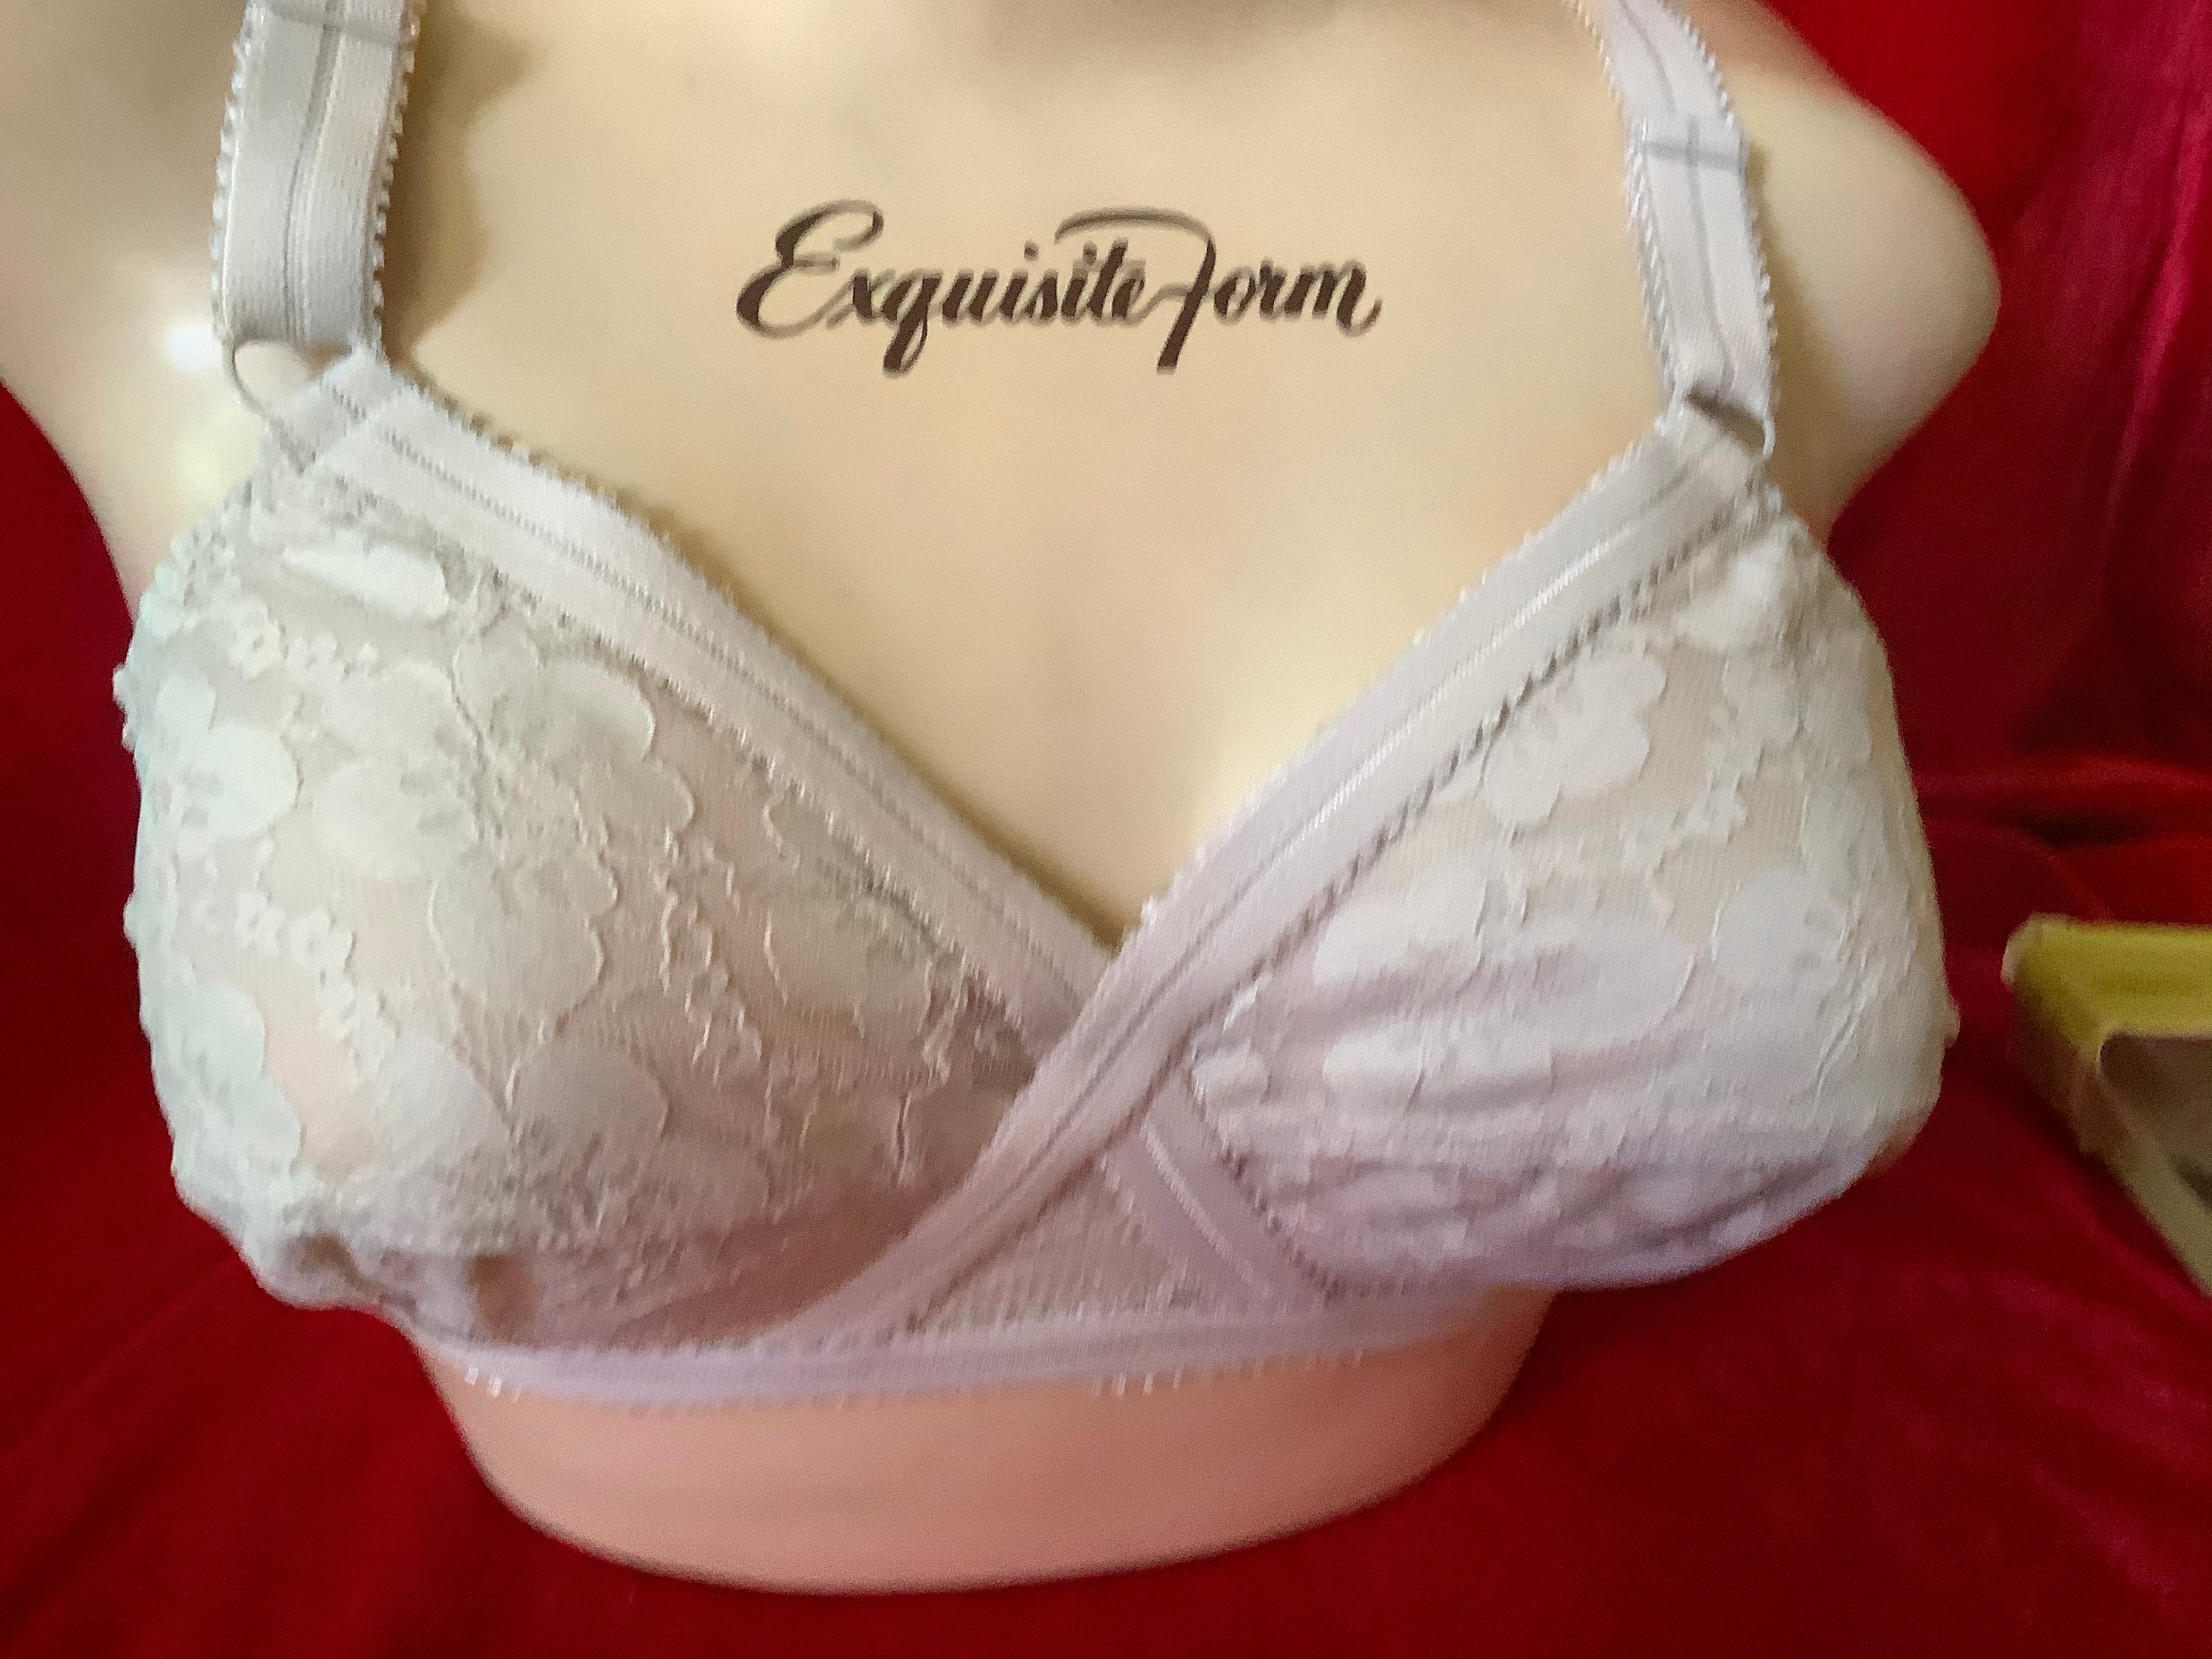 Non-wired Bra in White – Cross Your Heart 556